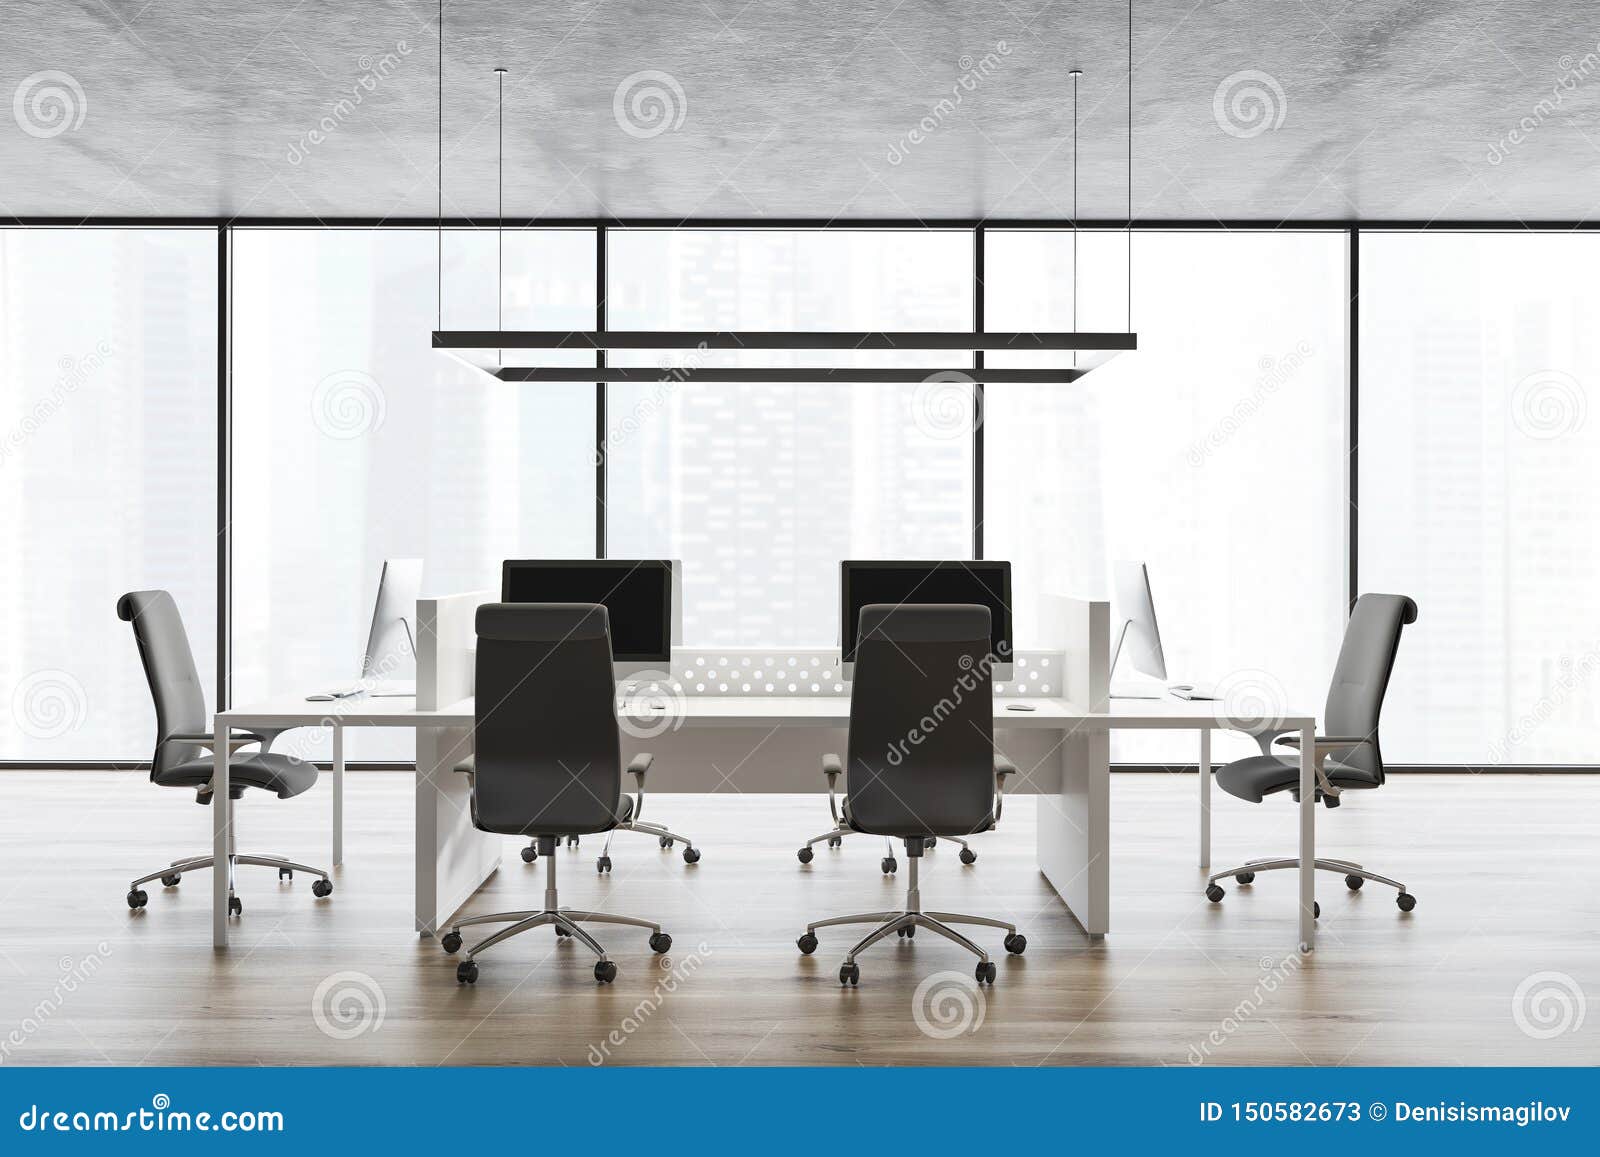 Panoramic Open Space Office Interior Stock Illustration